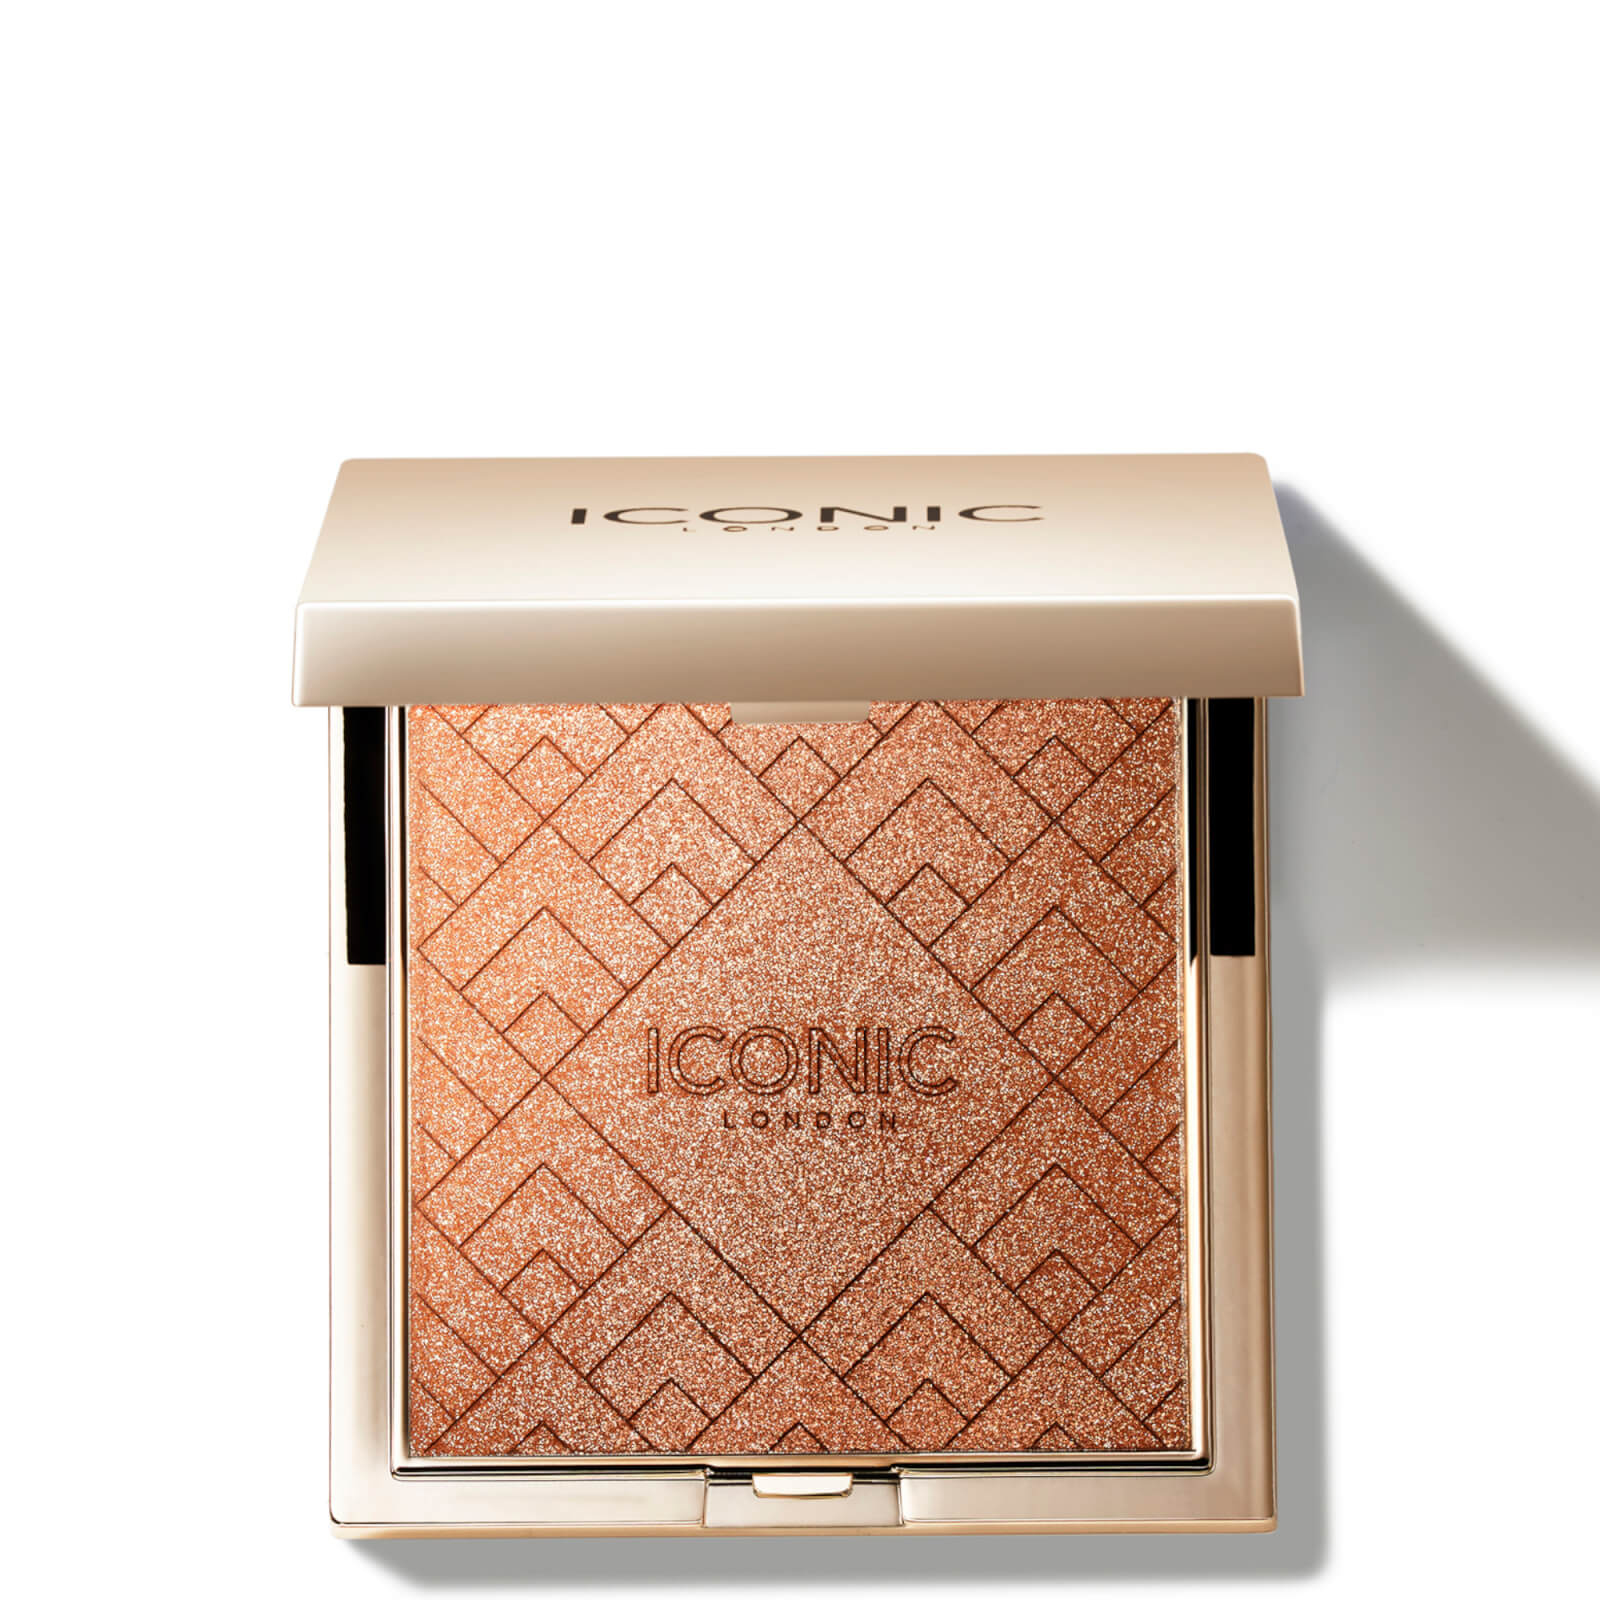 ICONIC London Kissed by the Sun Multi-Use Cheek Glow Exclusive (Various Shades) - Date Night